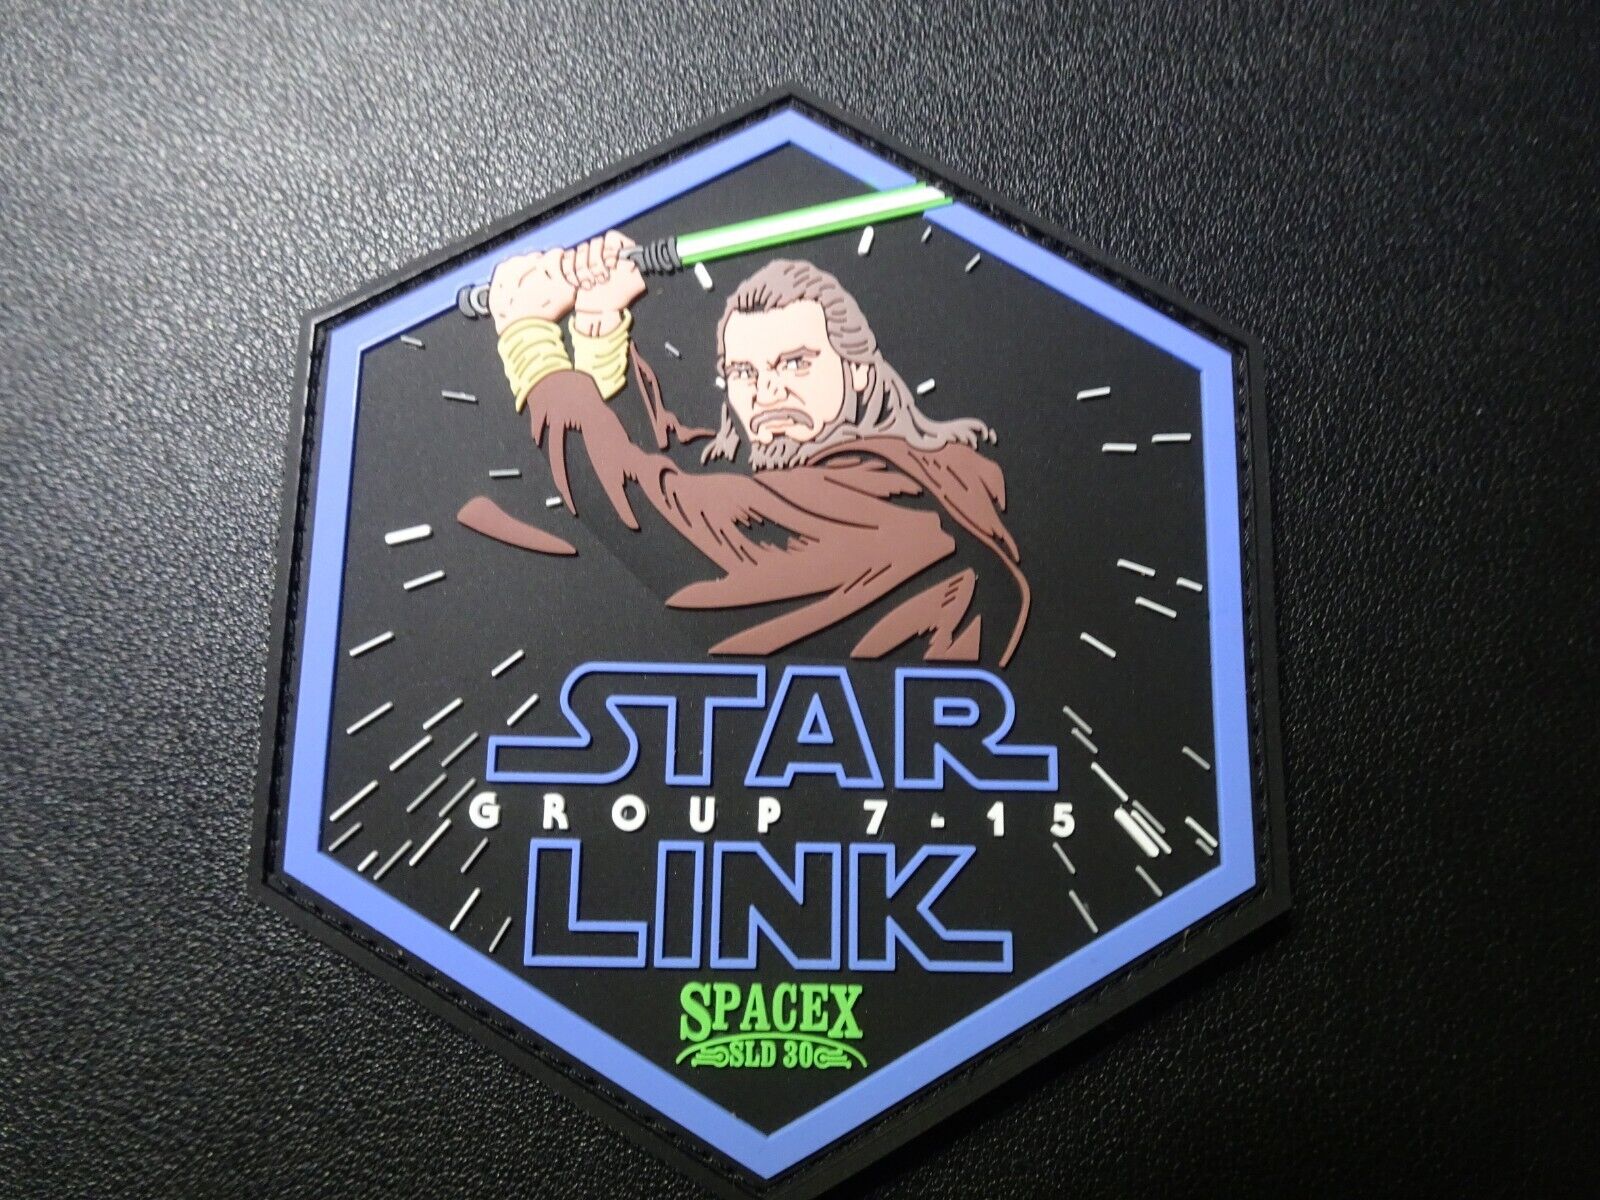 VSFB Western Range QUI GON JINN STARLINK GROUP 7-15 SLD-30 SPACE-X Mission Patch